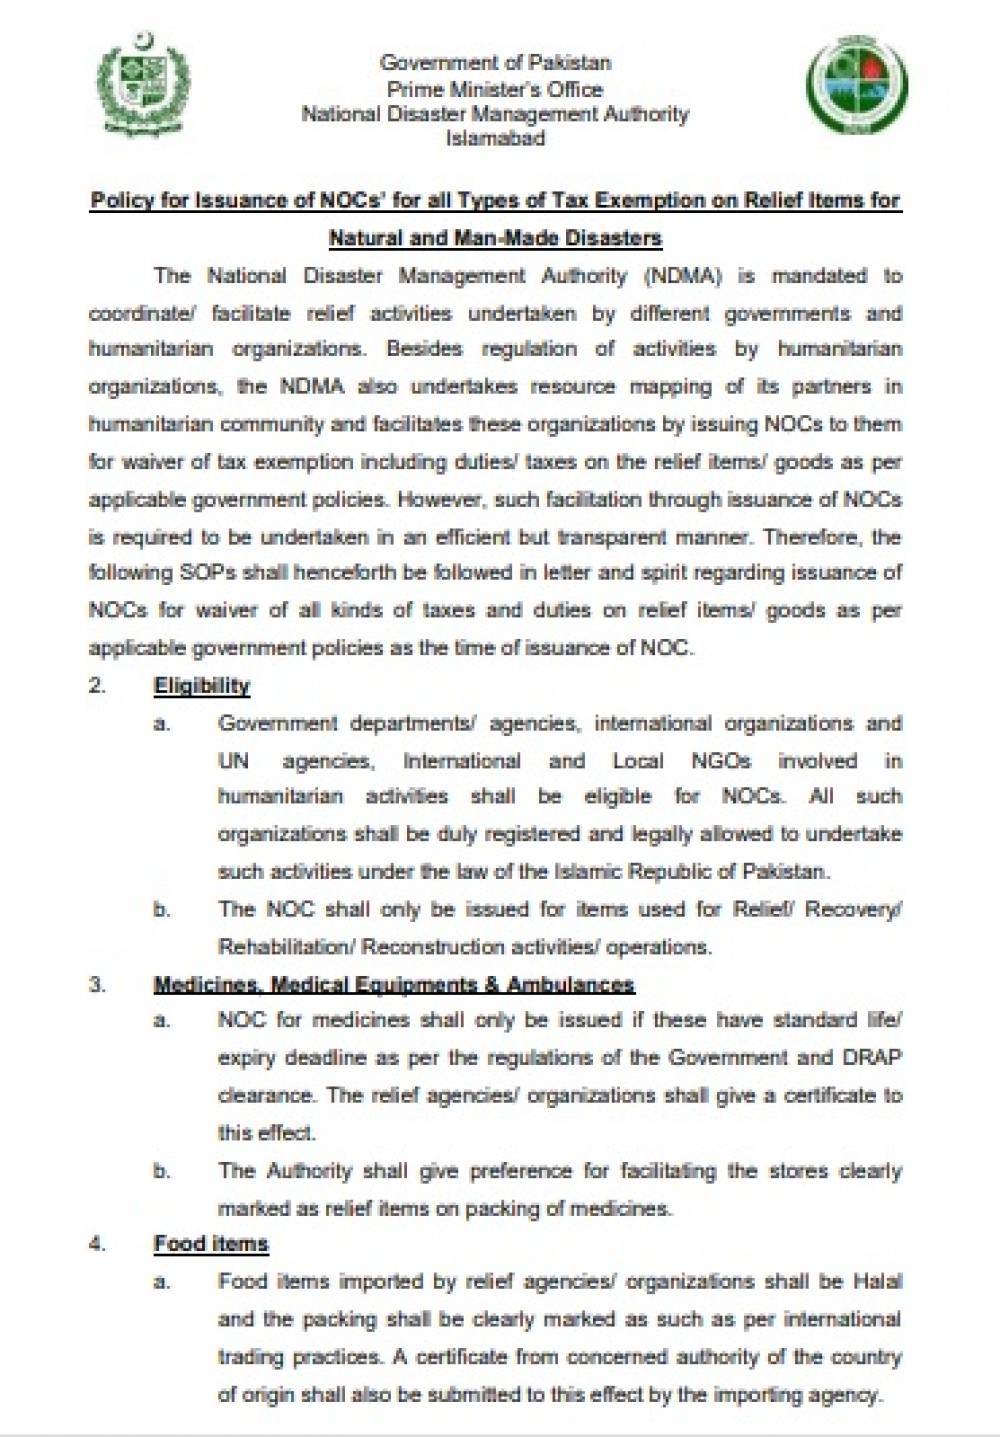 Policy for Issuance of NOCs’ for all Types of Tax Exemption on Relief Items for Natural and Man-Made Disasters